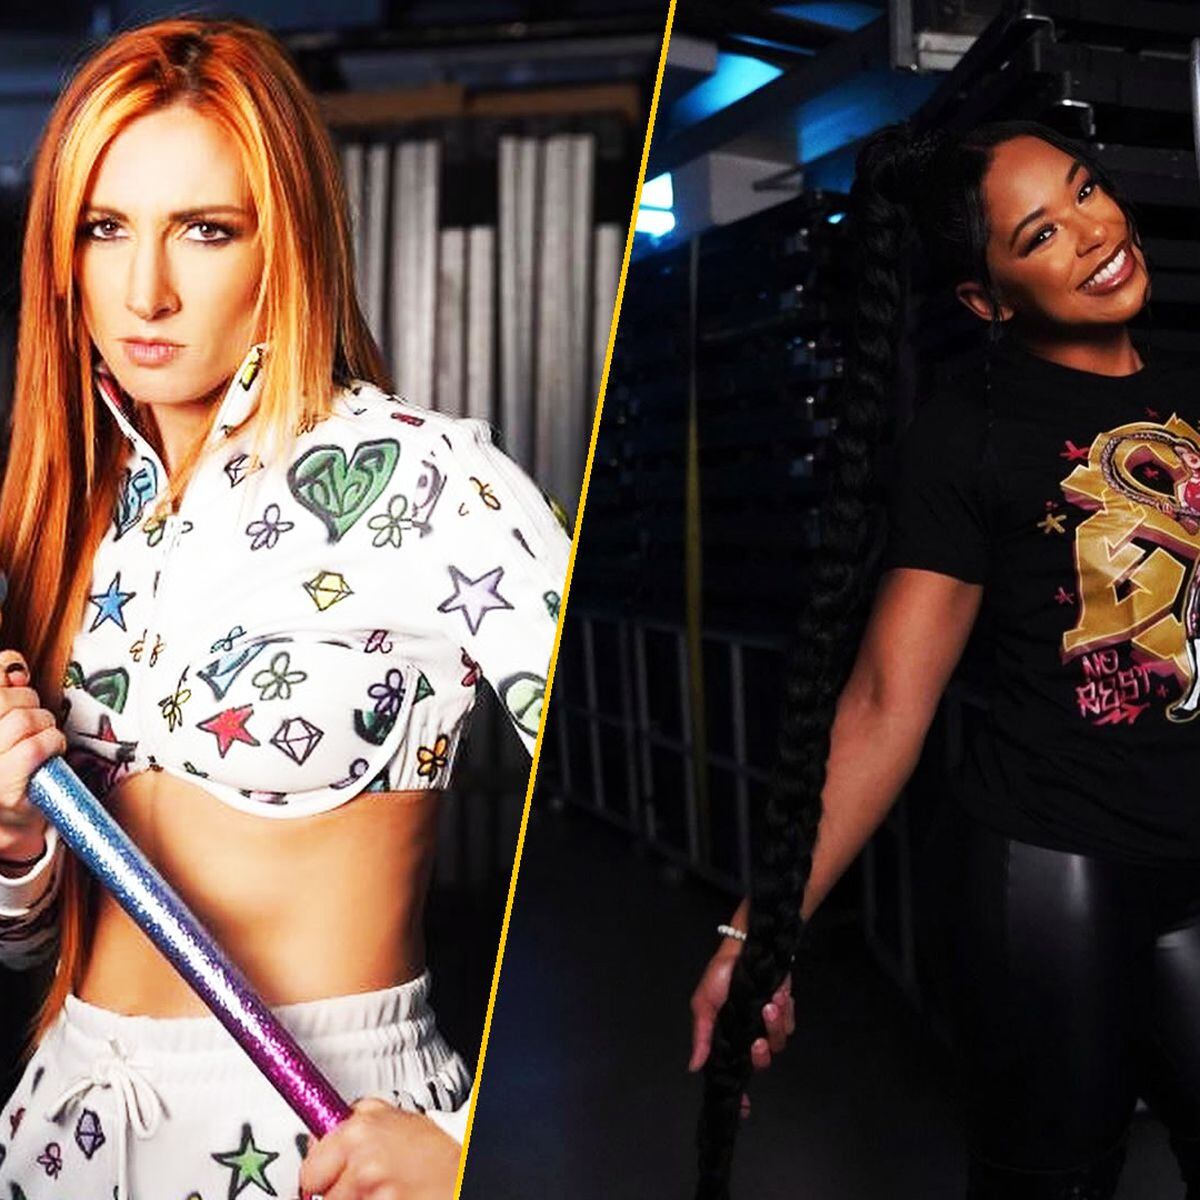 LEAK: WWE Becky Lynch and Bianca Belair Skins Coming to Fortnite